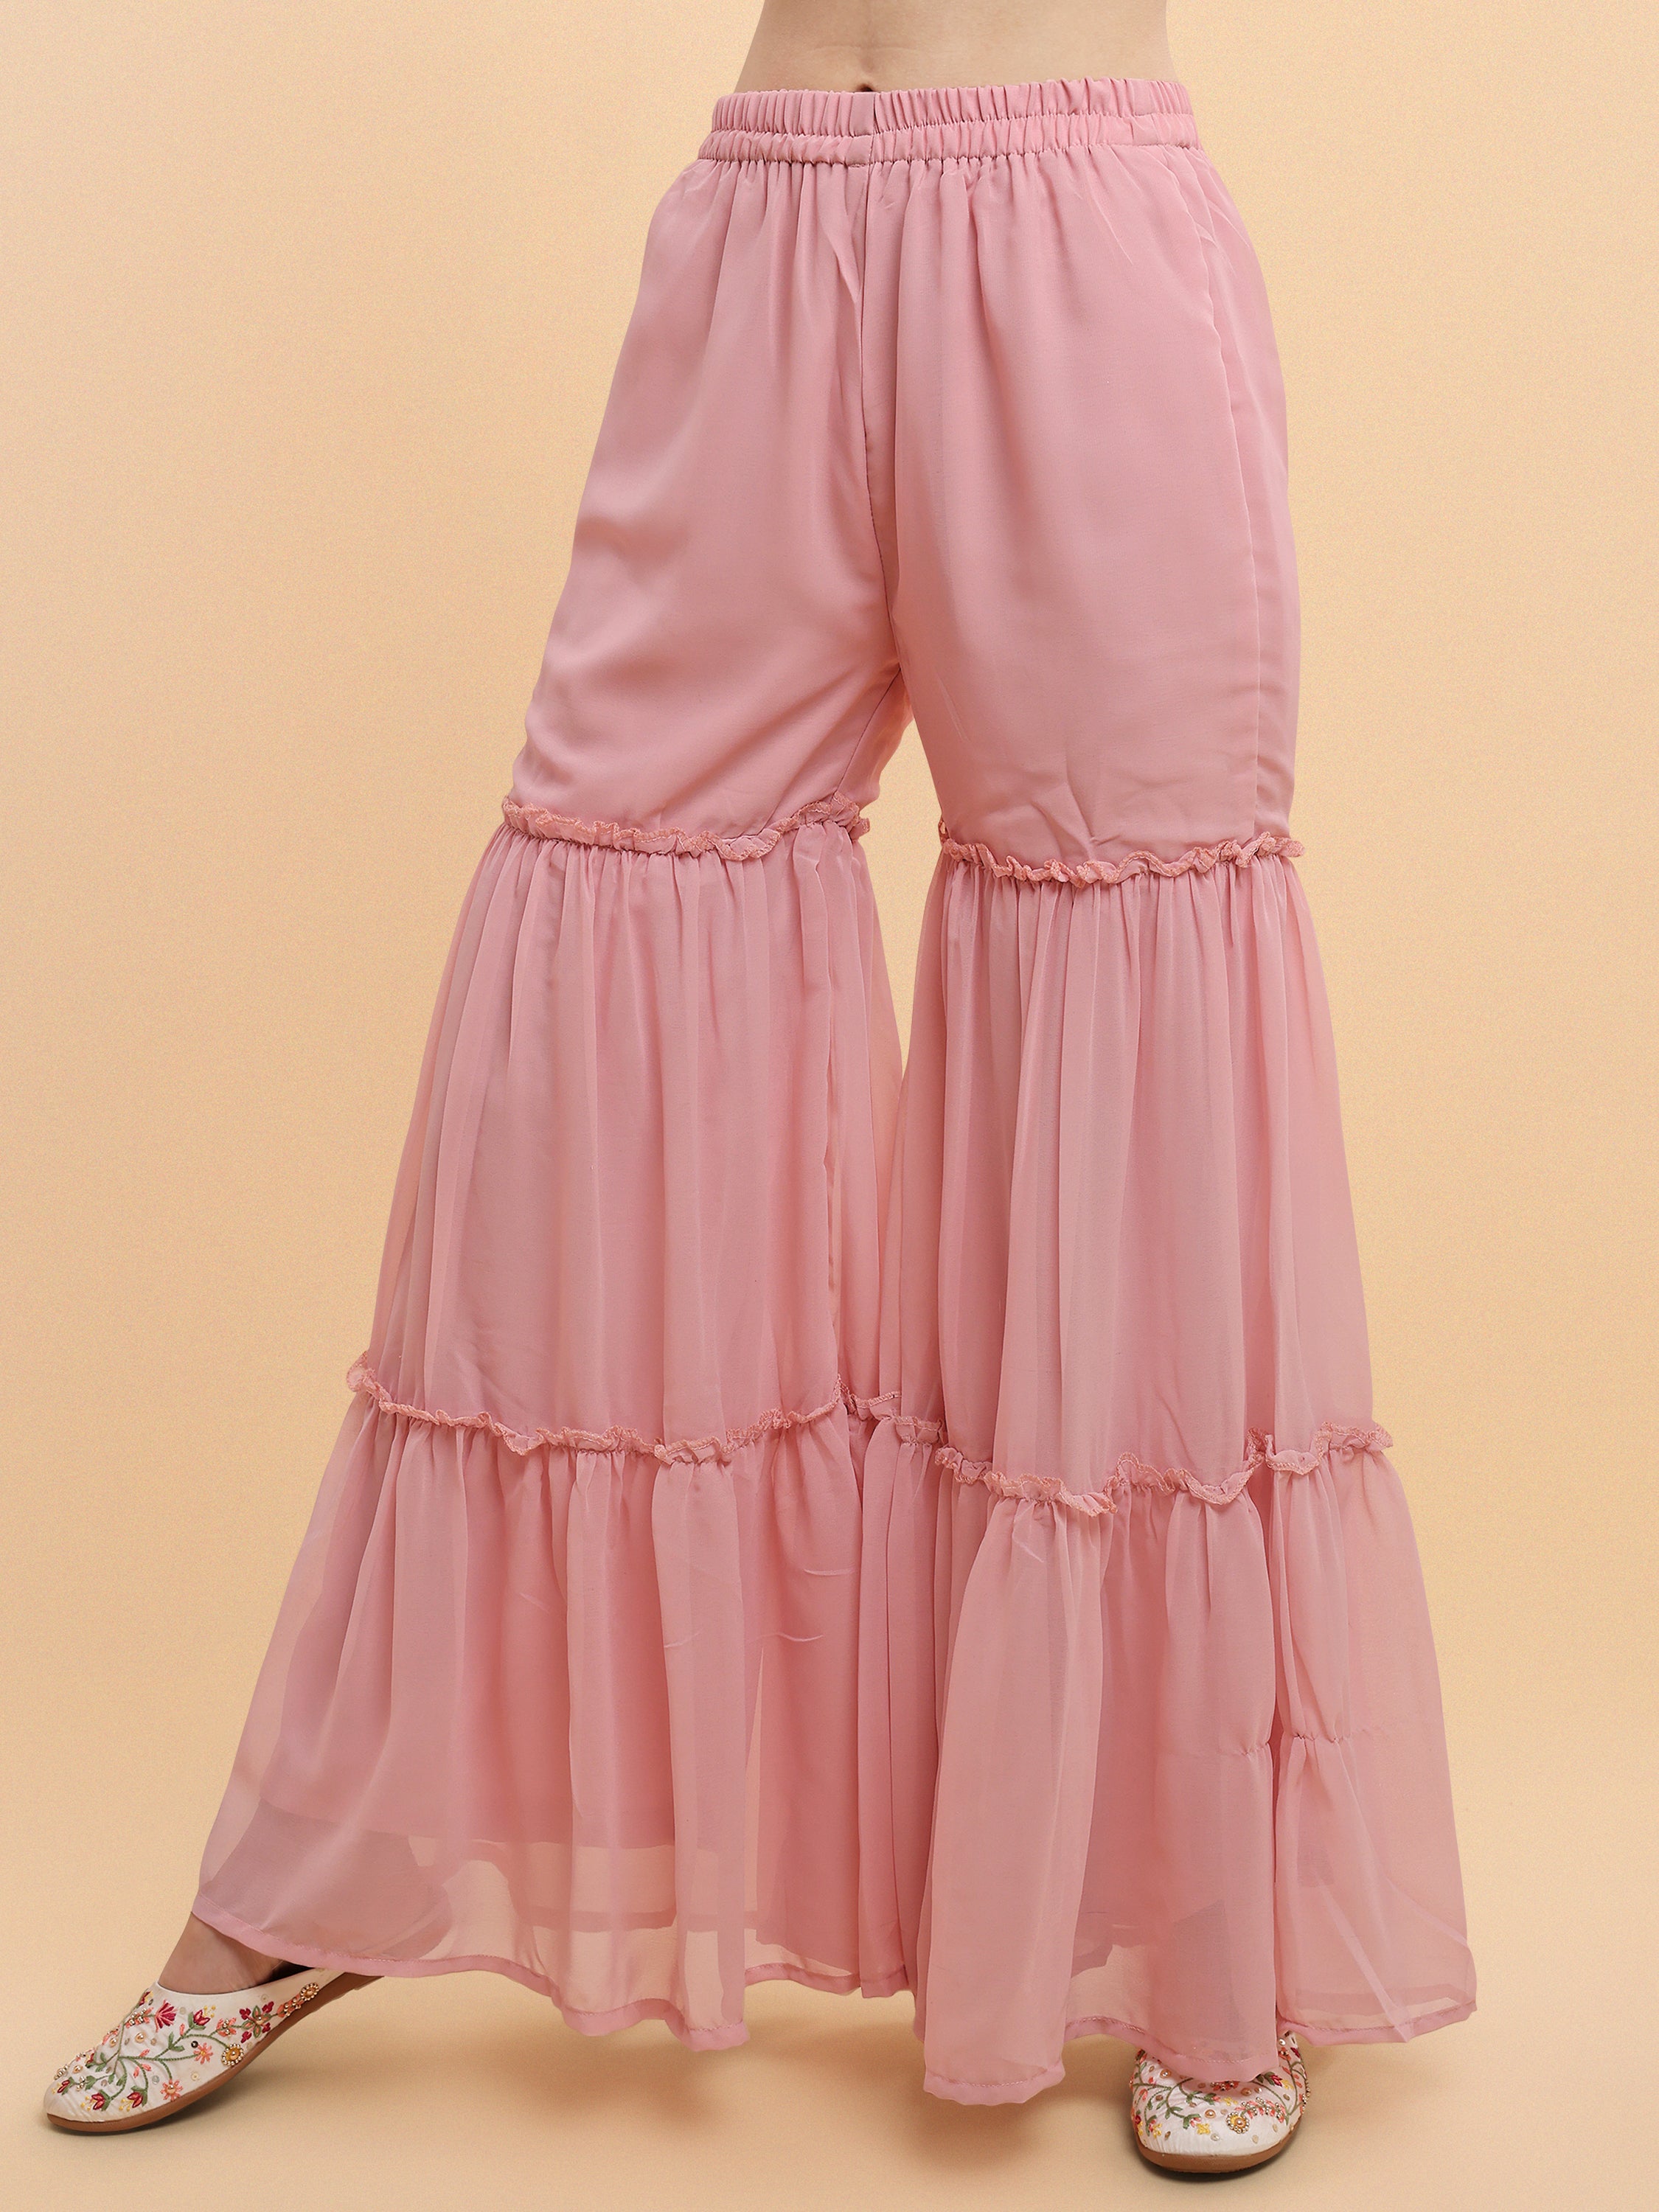 Onion Pink Palazzo Suit In Chiffon With Embroidery Long Sleeves Jacket